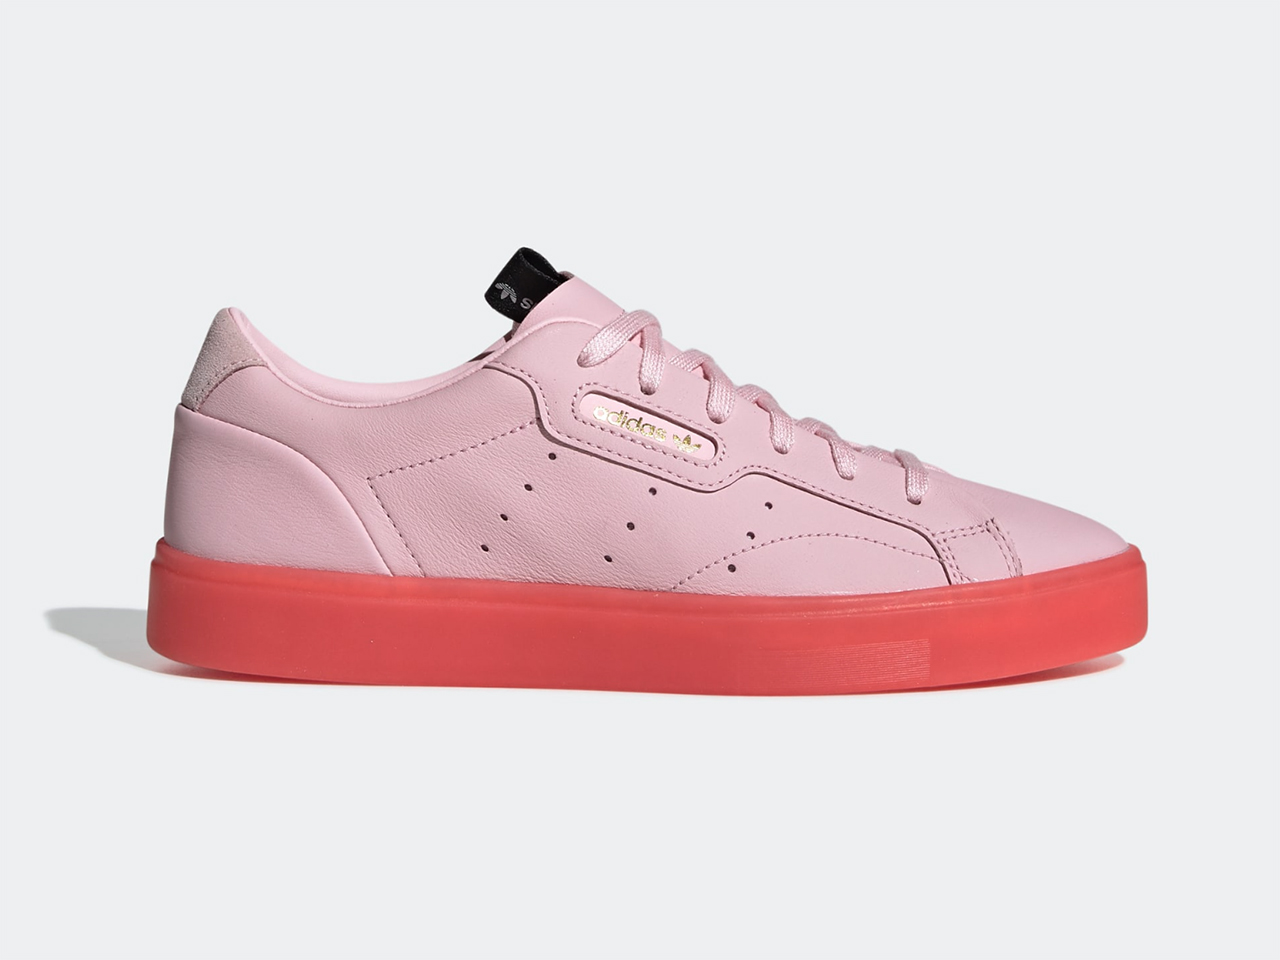 Great running shoes: Right shoe of Adidas sleek shoe in pink